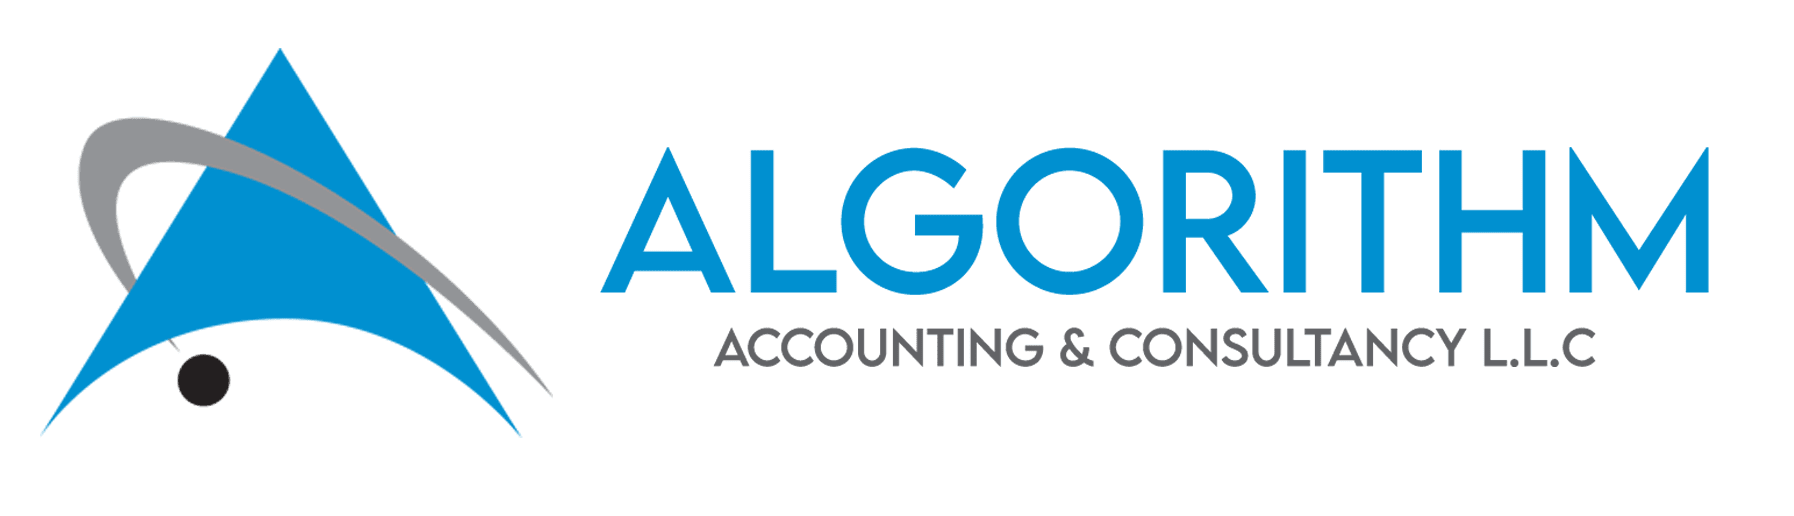 Accounting and Bookkeeping Service In Dubai